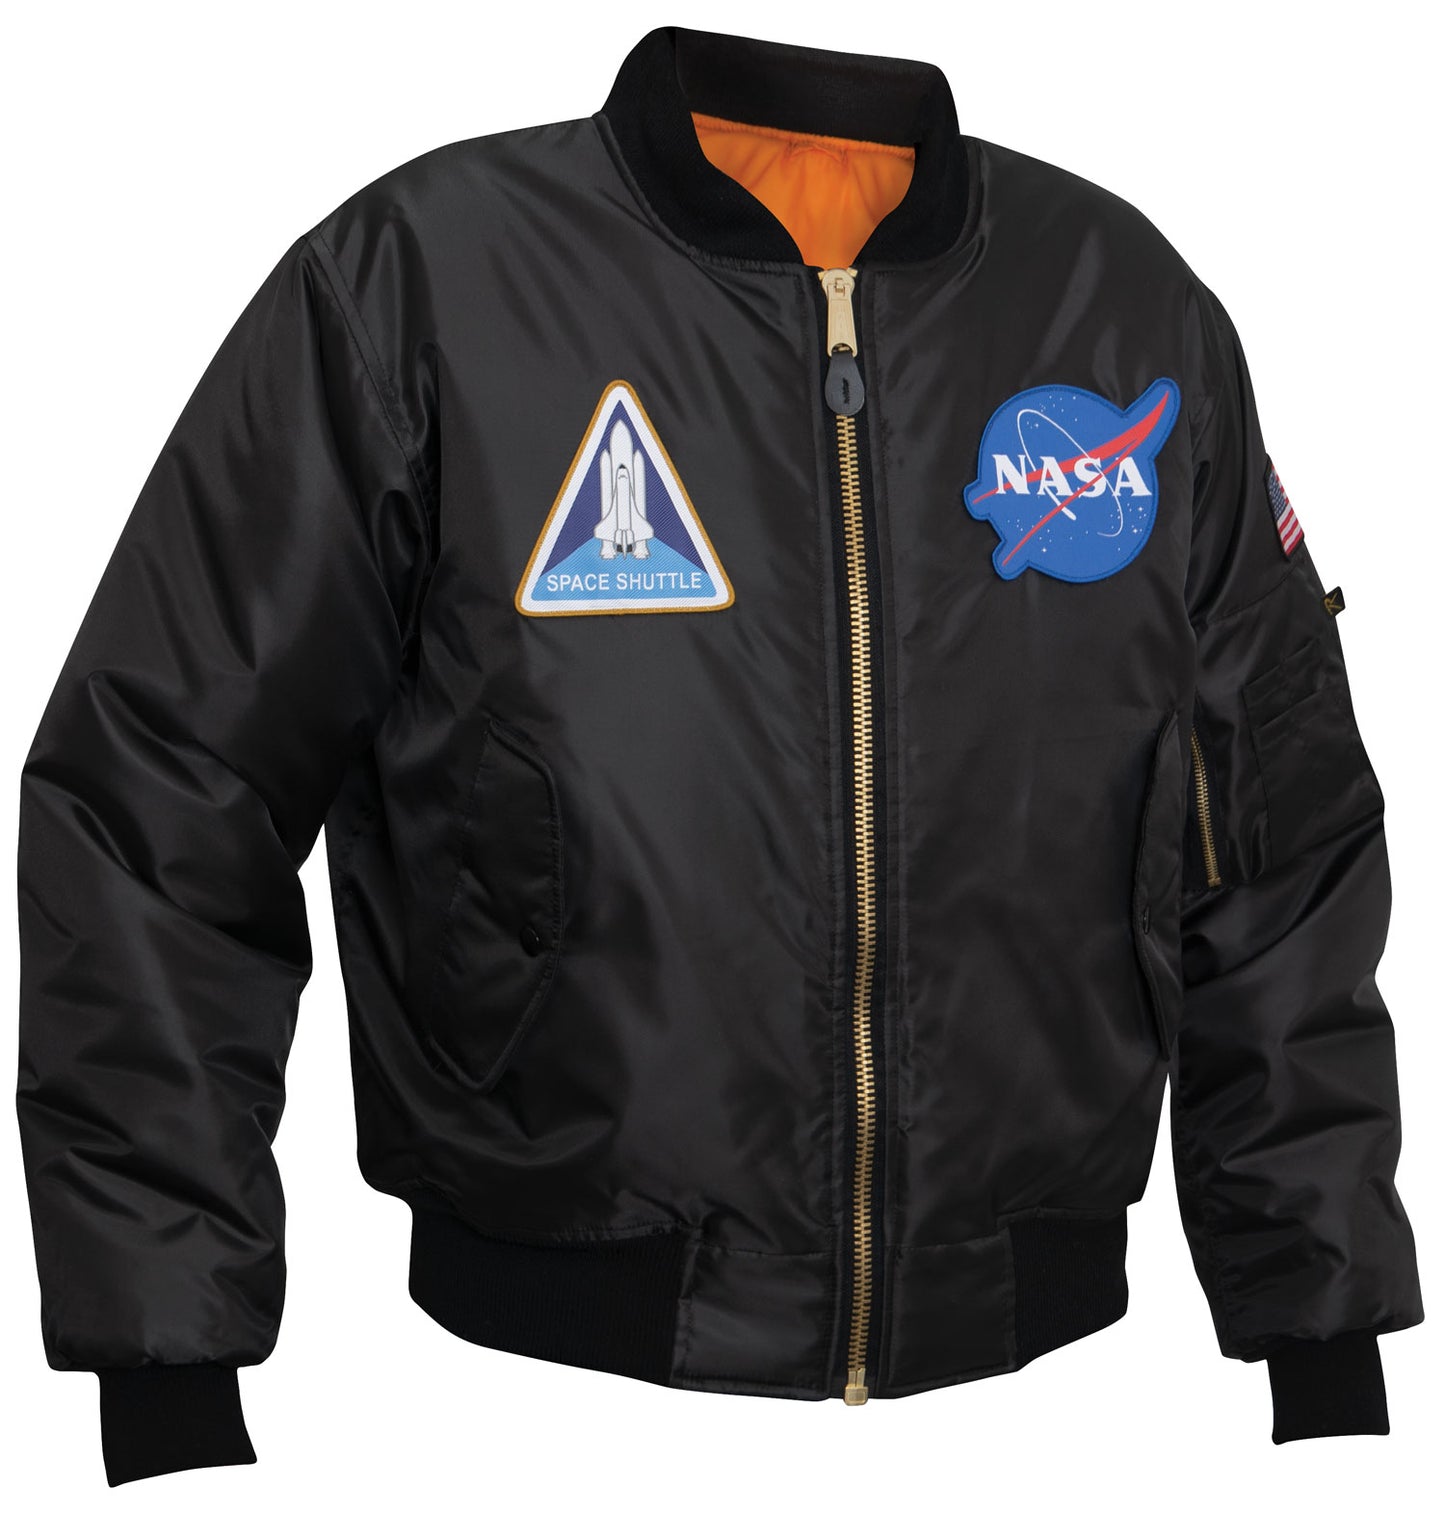 Reversible MA-1 Flight Jacket in Black With NASA Patches